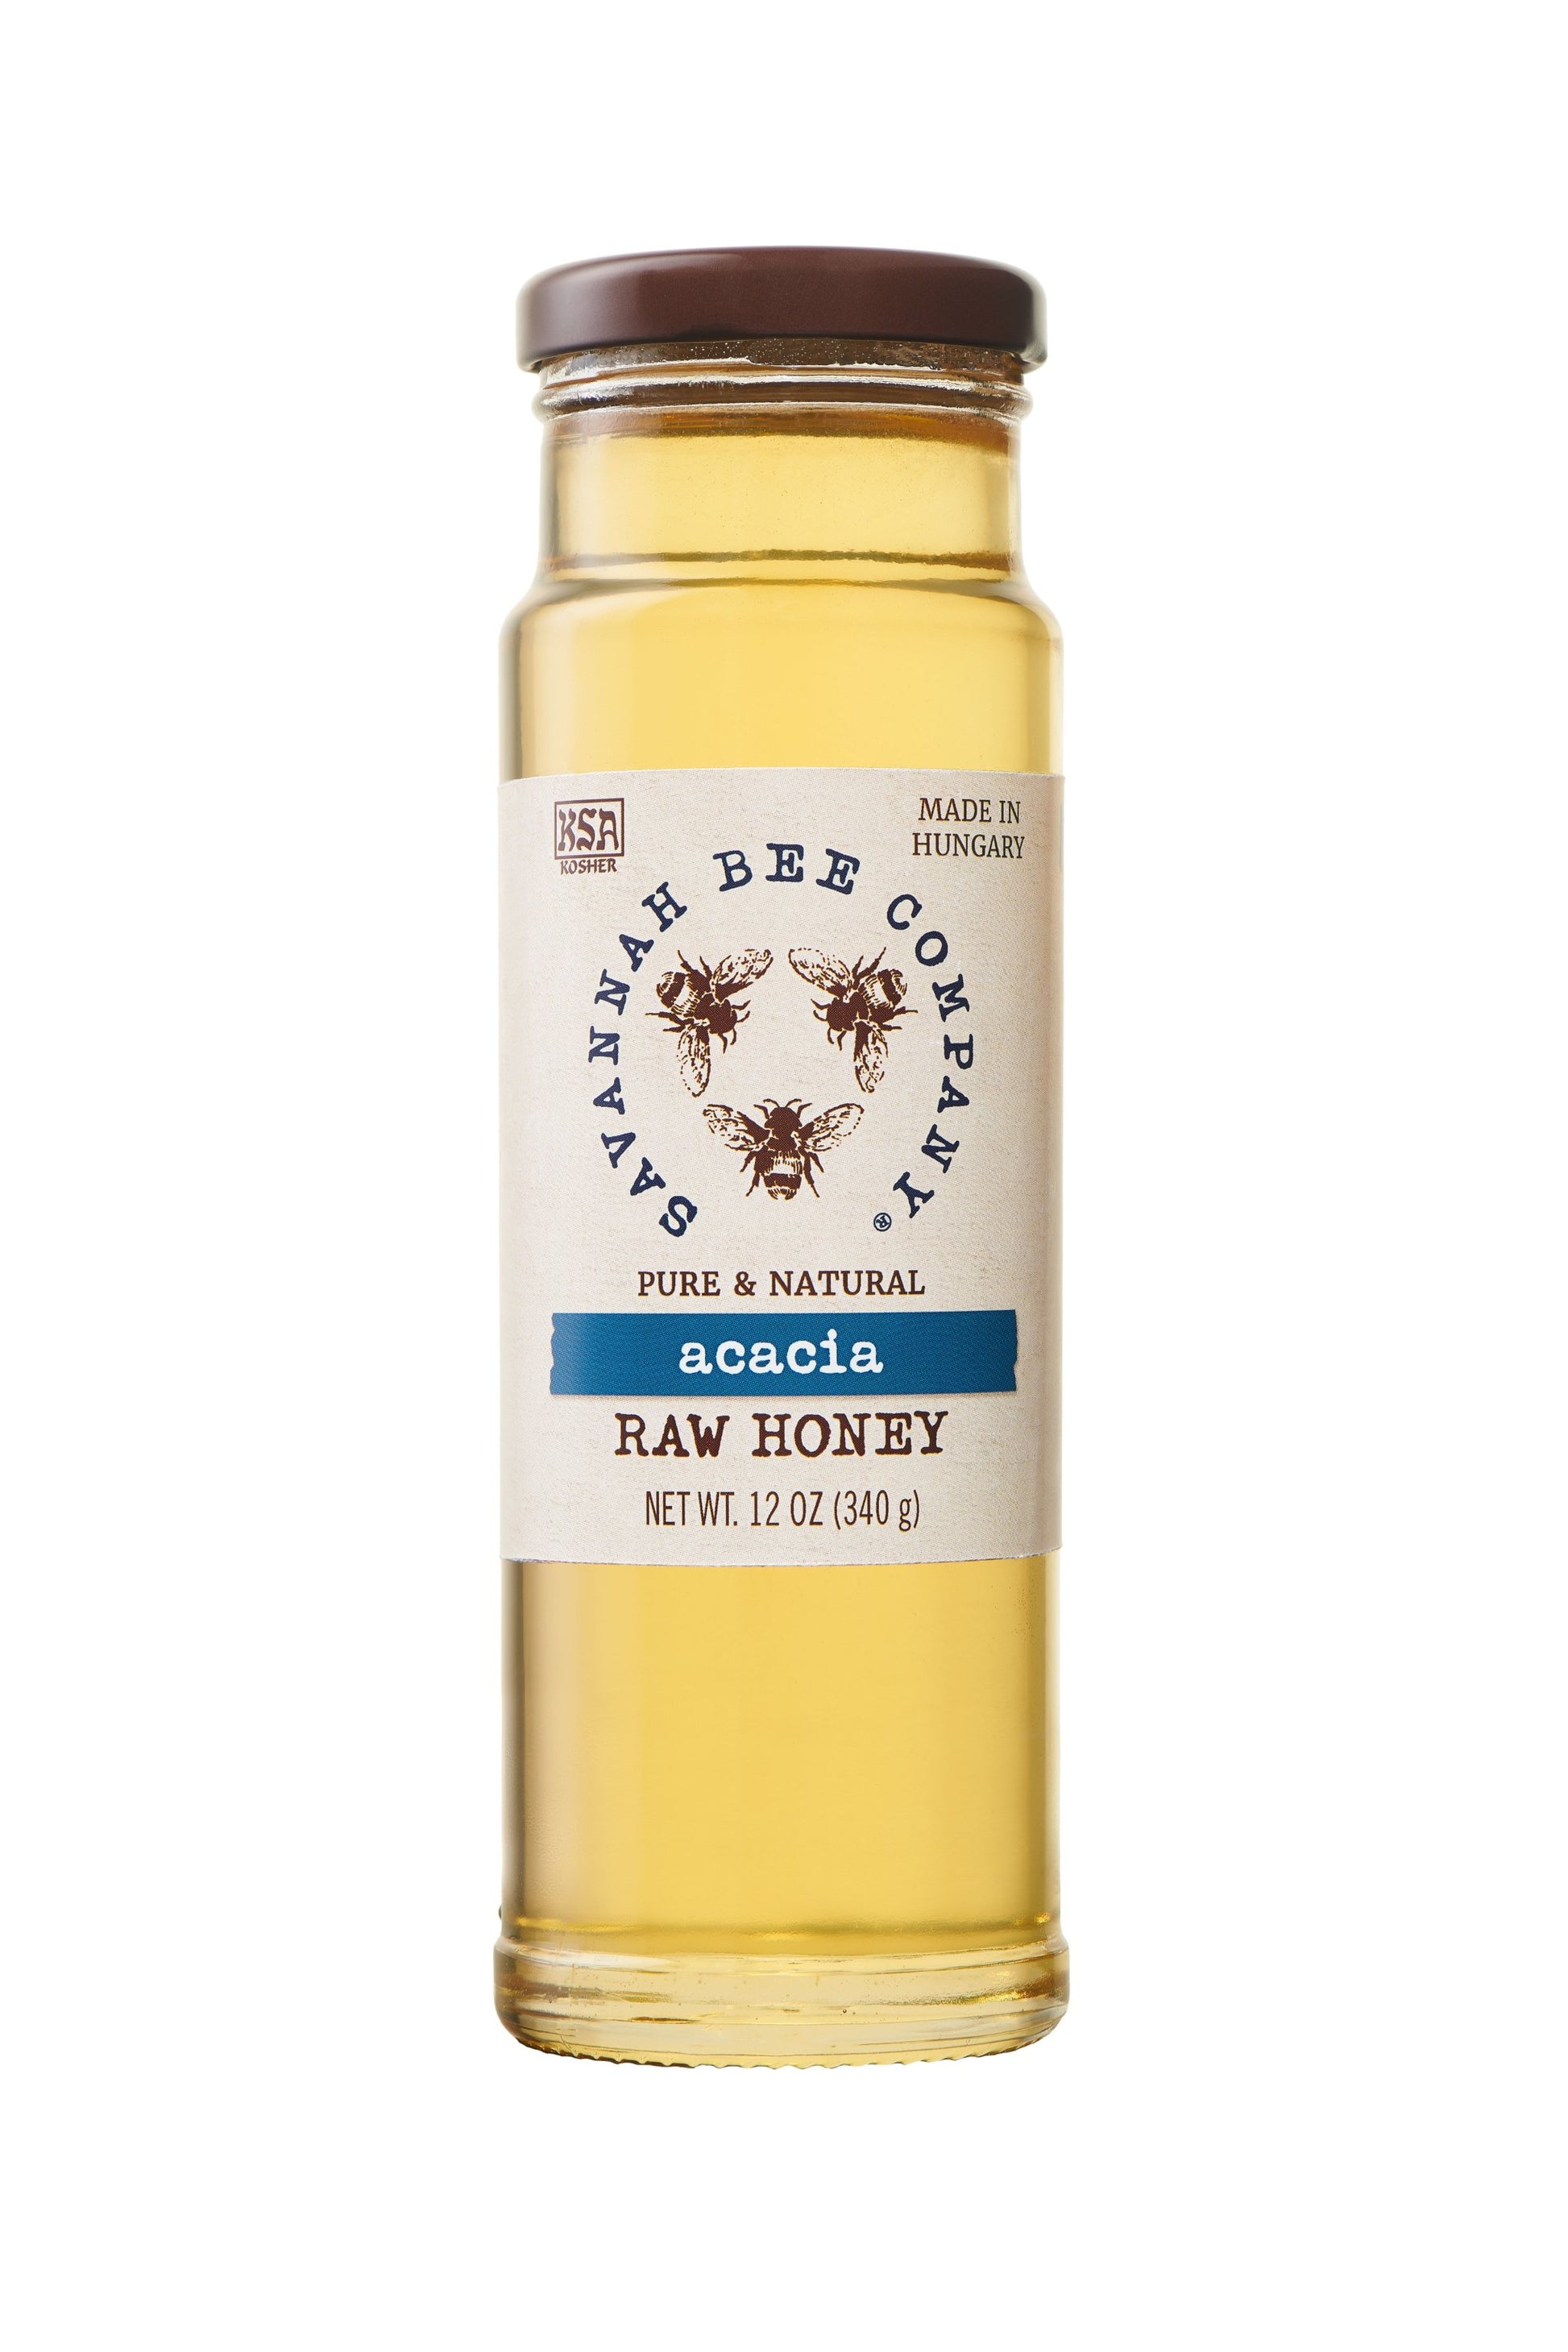 Acacia Raw Honey in a 12oz tower, Kosher and made in Hungary.